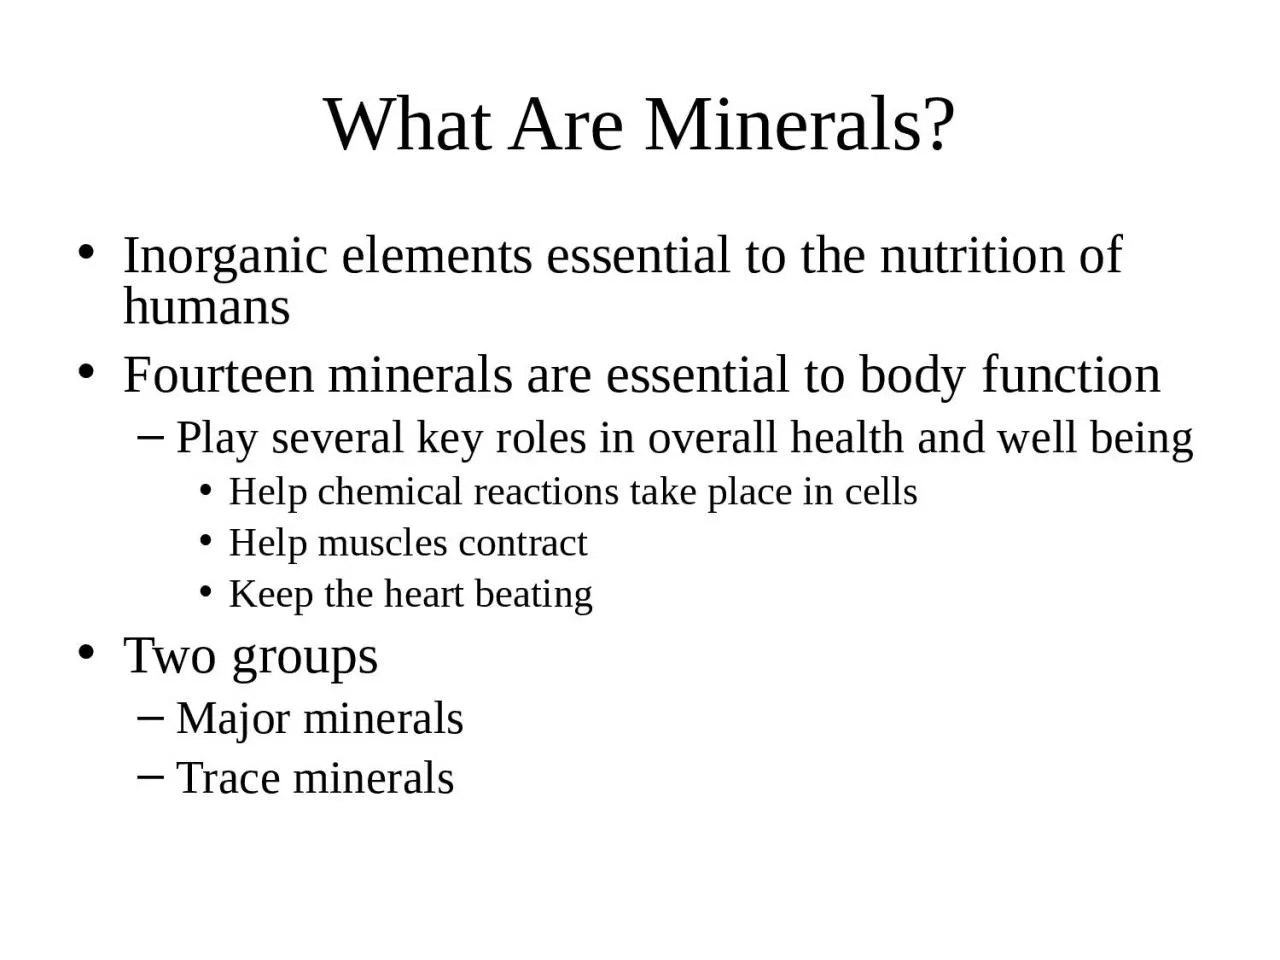 What Are Minerals? Inorganic elements essential to the nutrition of humans